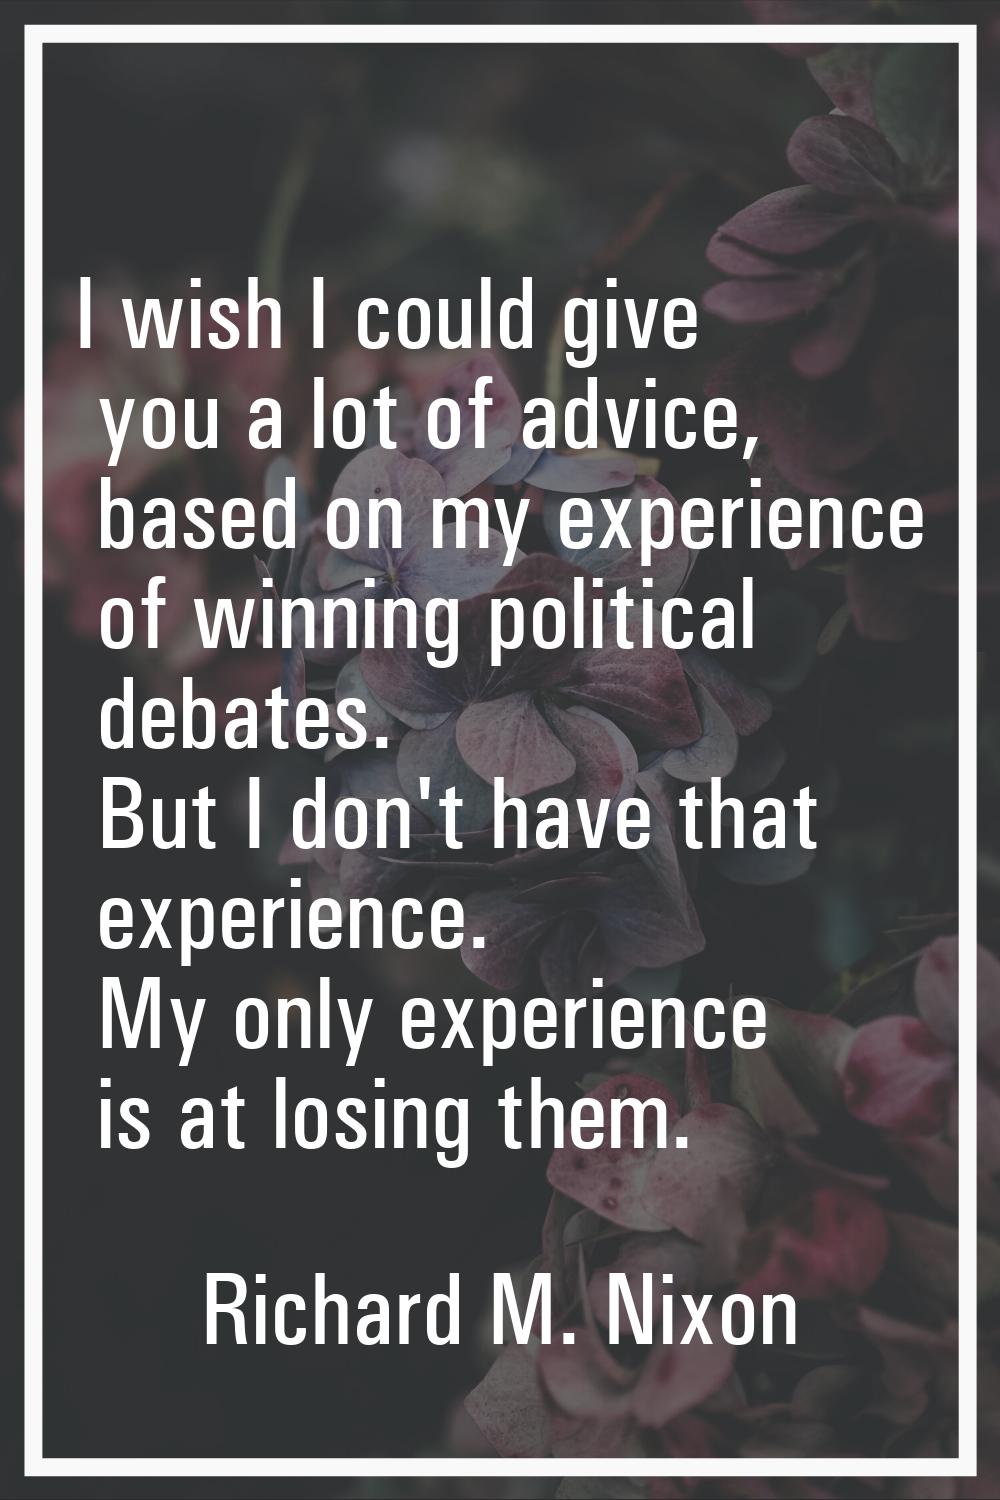 I wish I could give you a lot of advice, based on my experience of winning political debates. But I